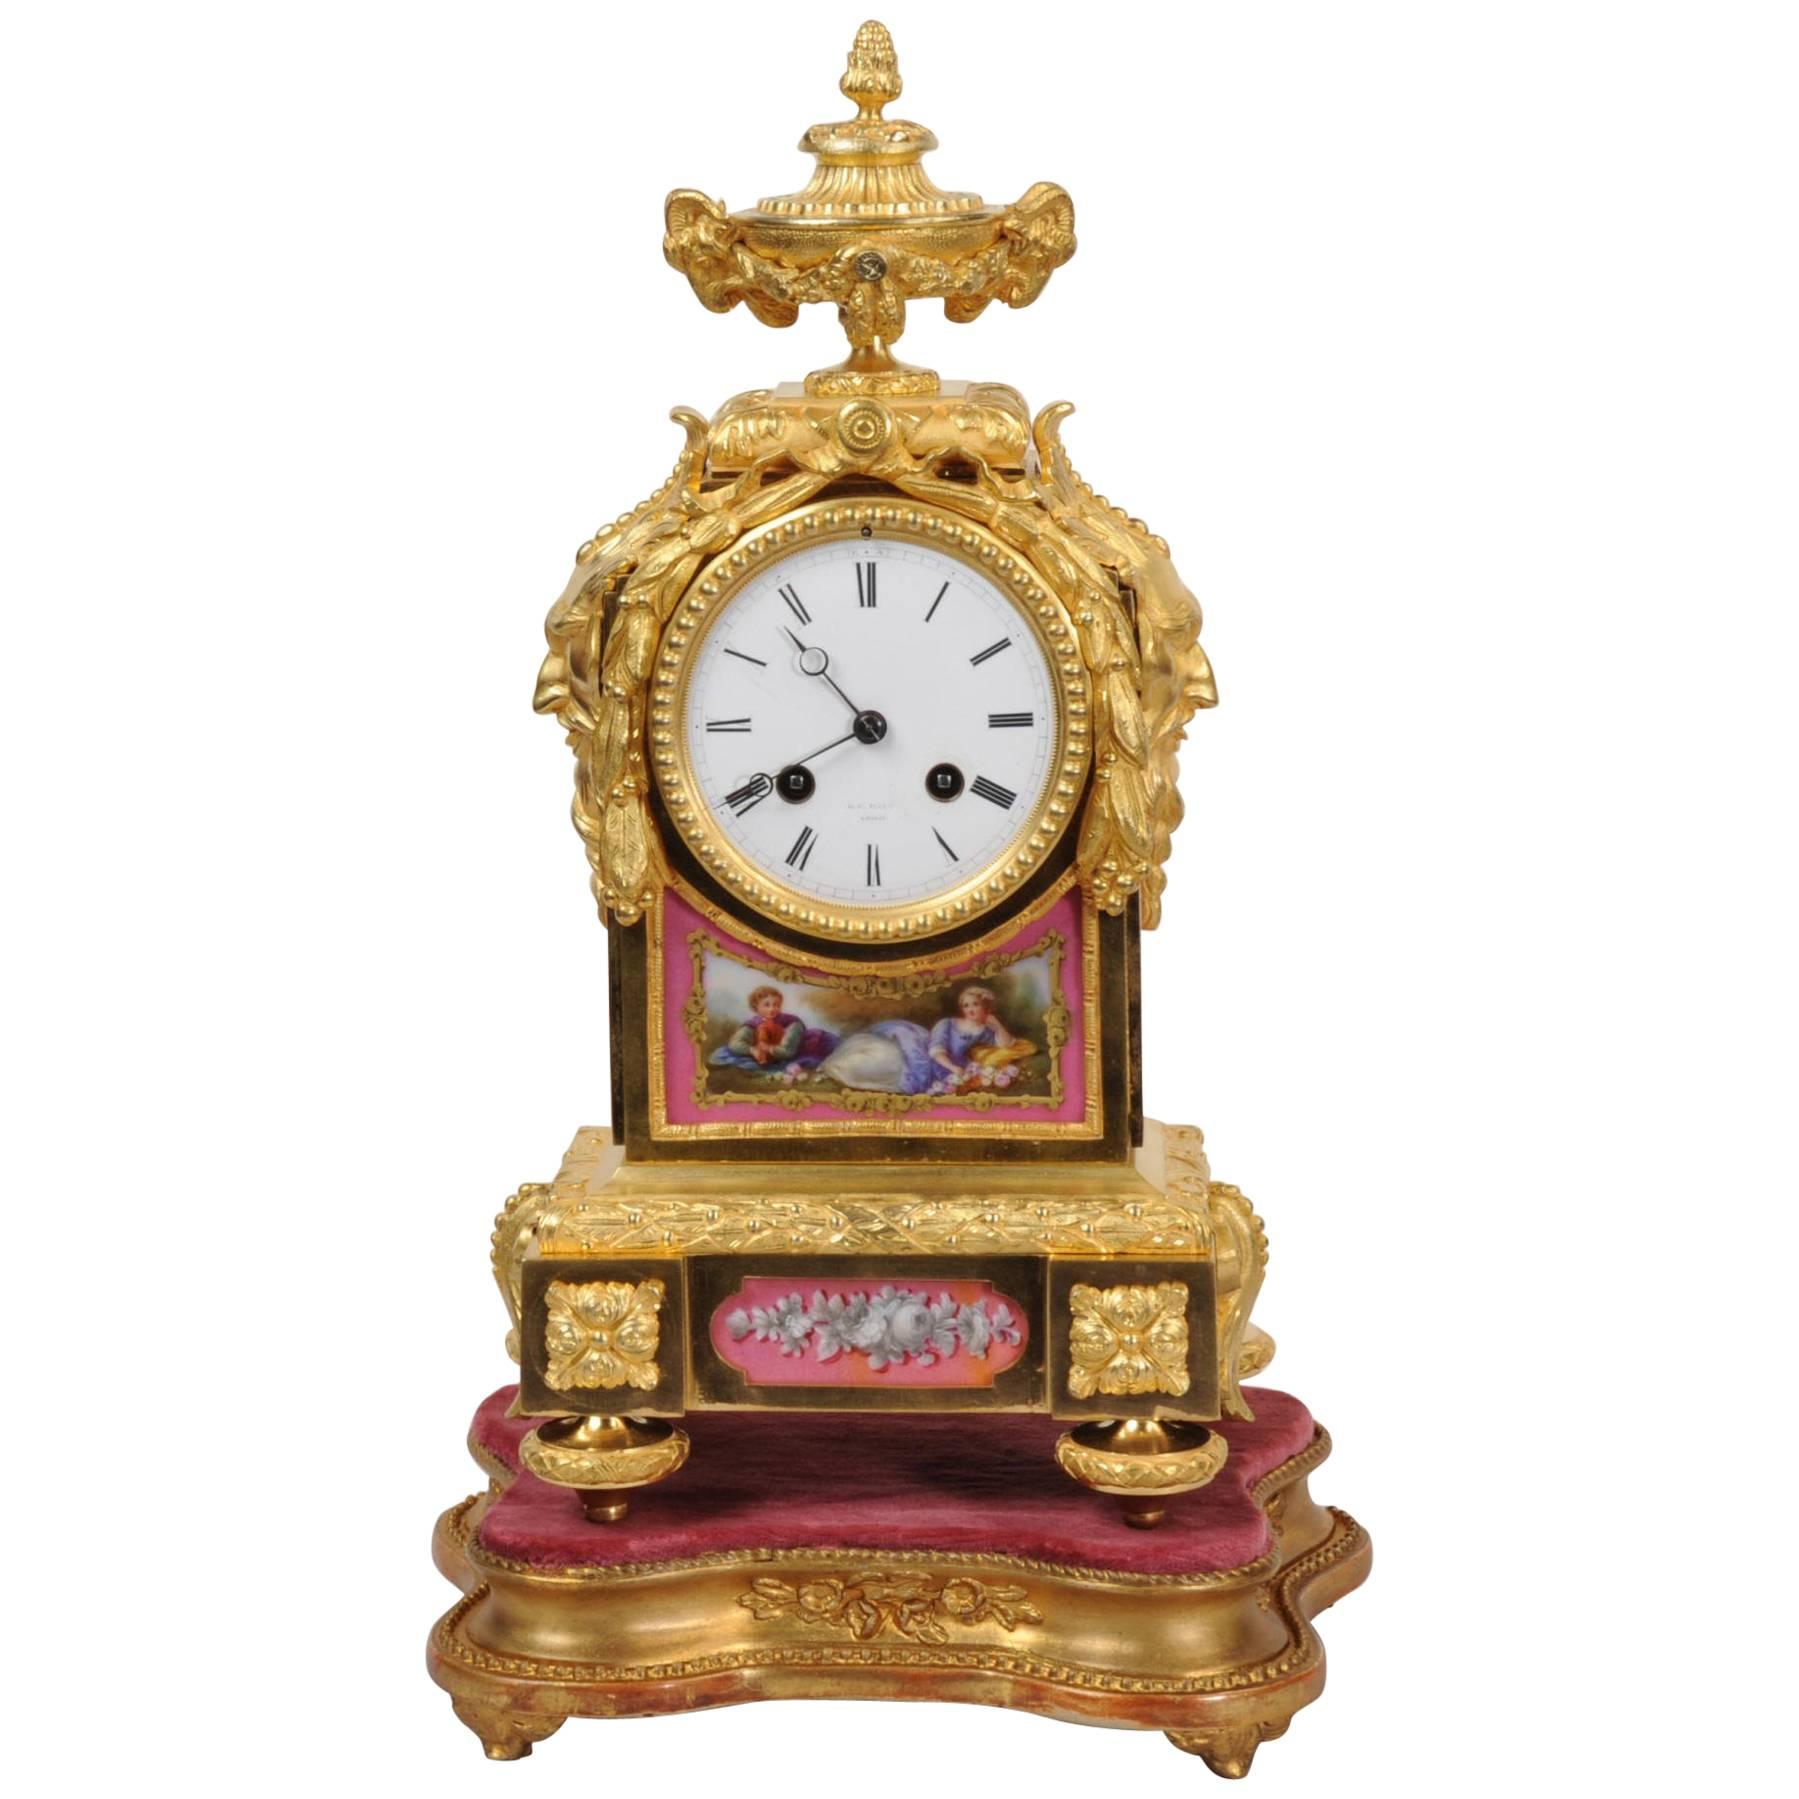 Early Ormolu and Sèvres Porcelain Clock by Raingo Frères, Fully Working